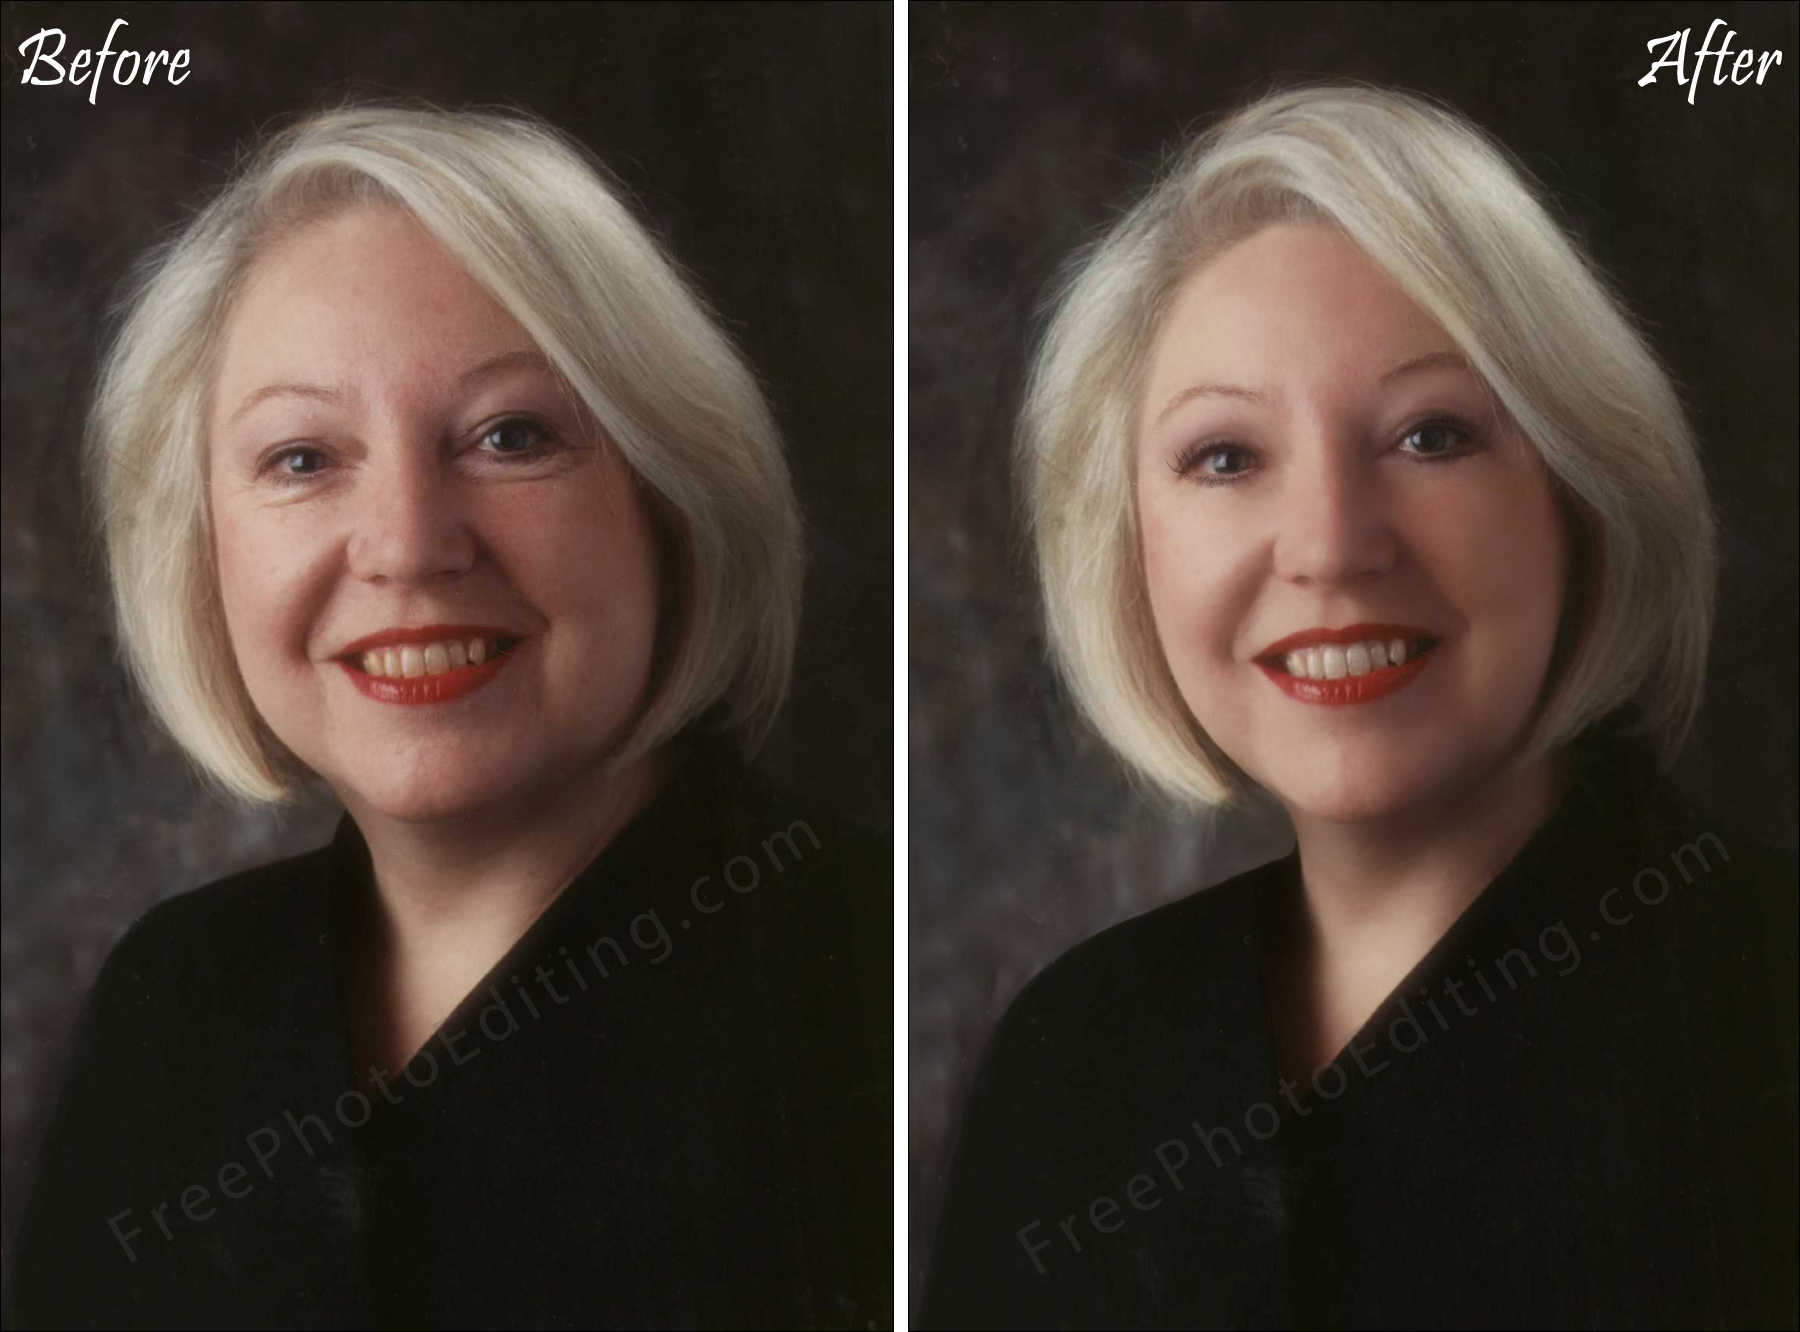 This is a retouched photo in which the woman has been made to look considerably young with virtual skin treatment and digital Botox.